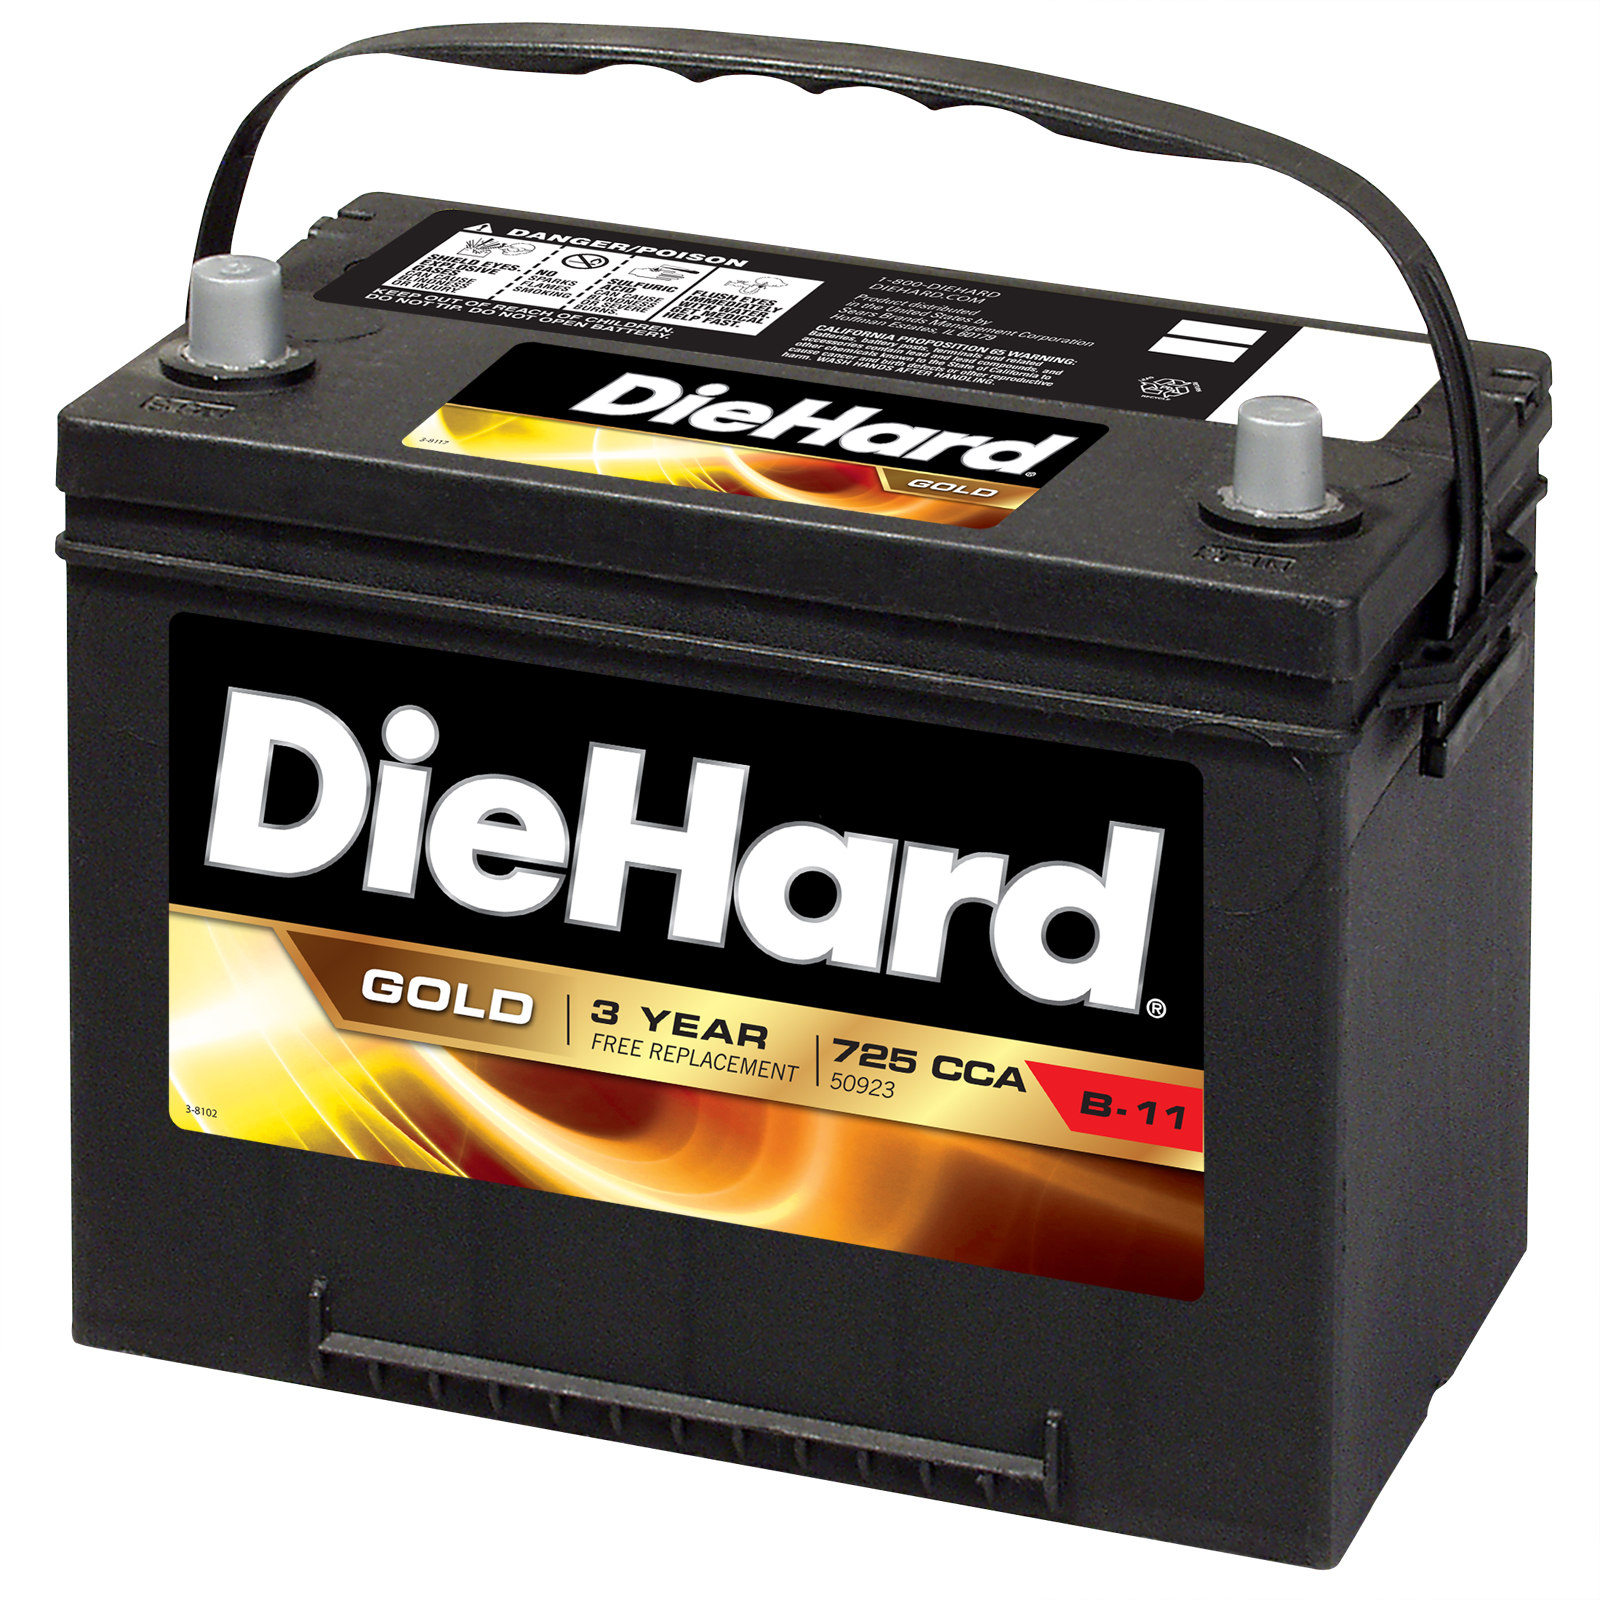 diehard-gold-automotive-battery-group-size-ep-24f-price-with